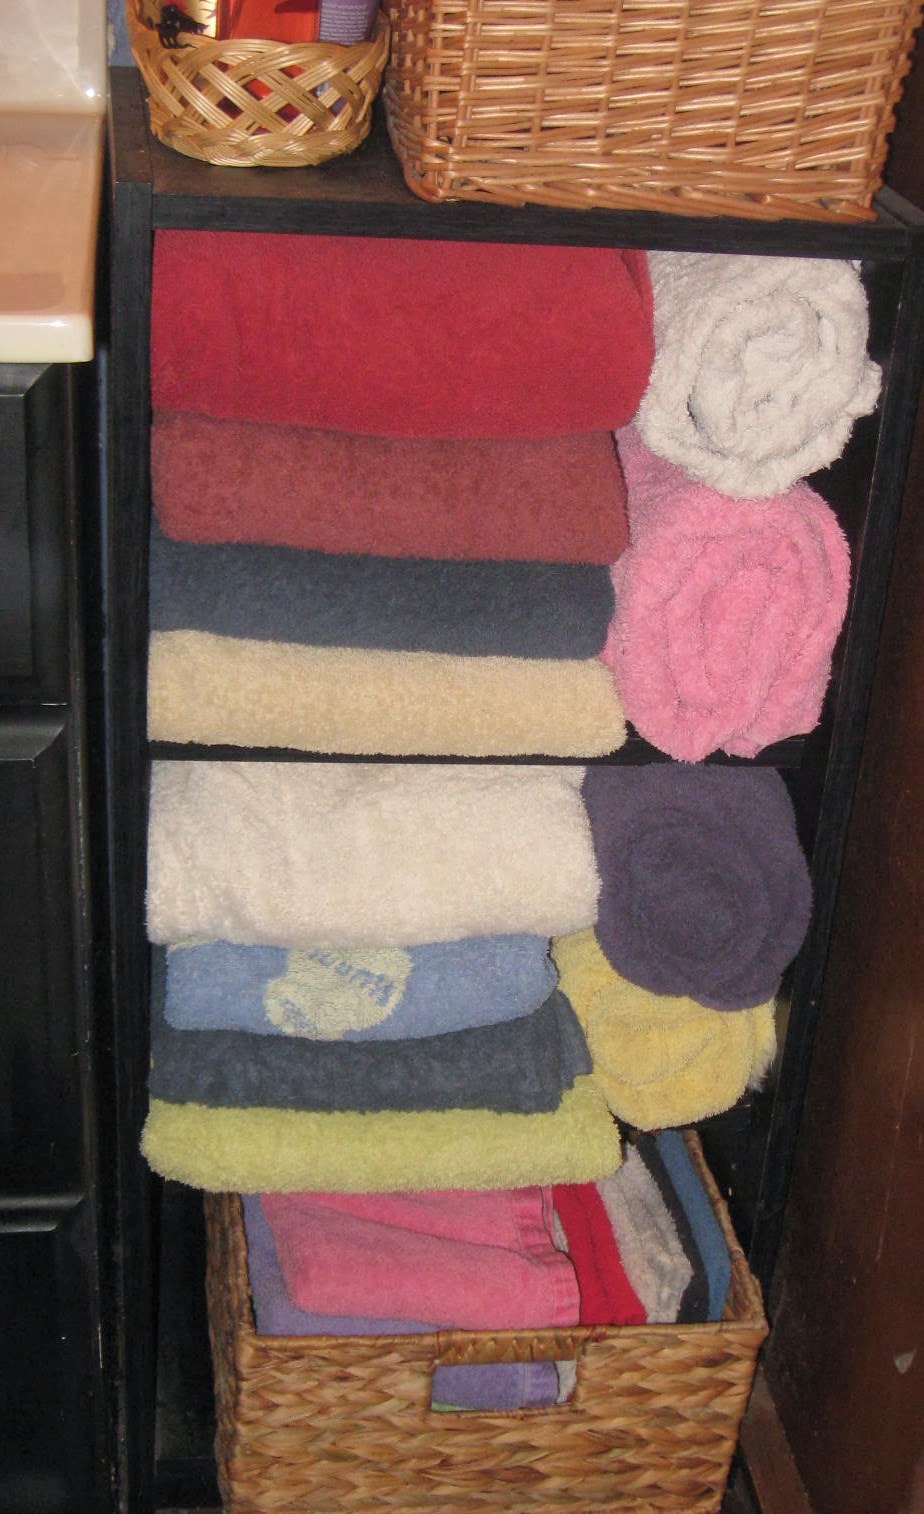 Simply Organized Homemaking Neatly Folded Towels